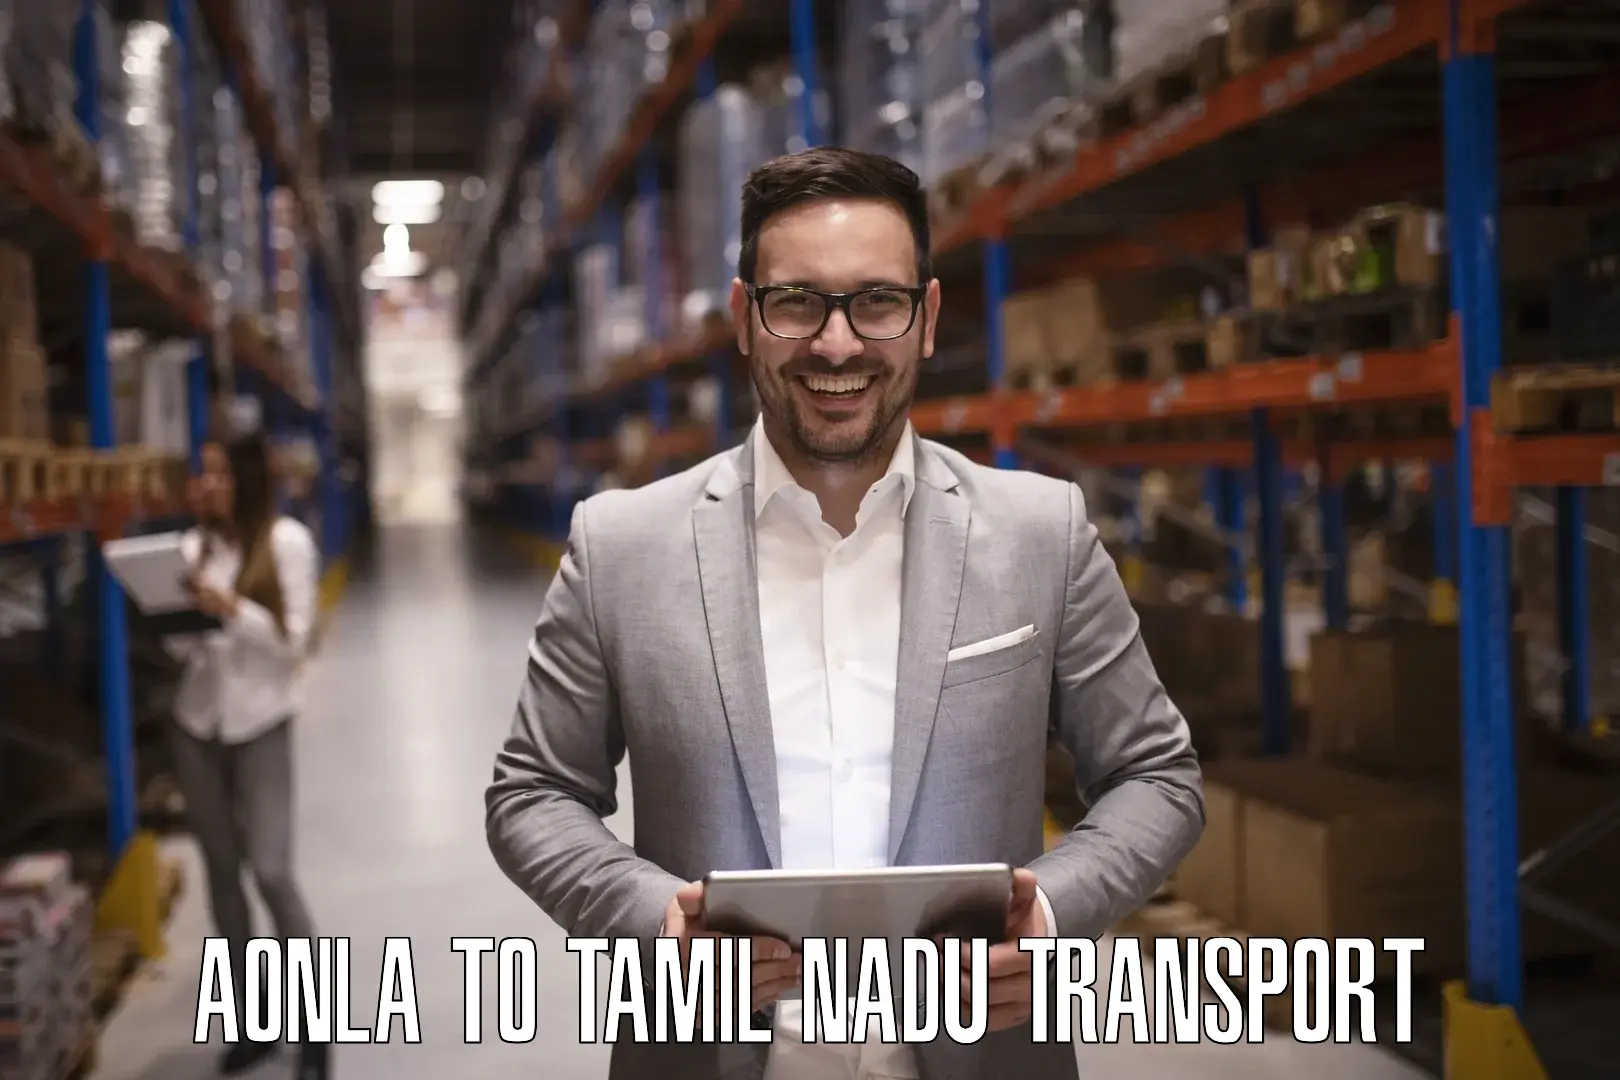 Package delivery services Aonla to Tamil Nadu